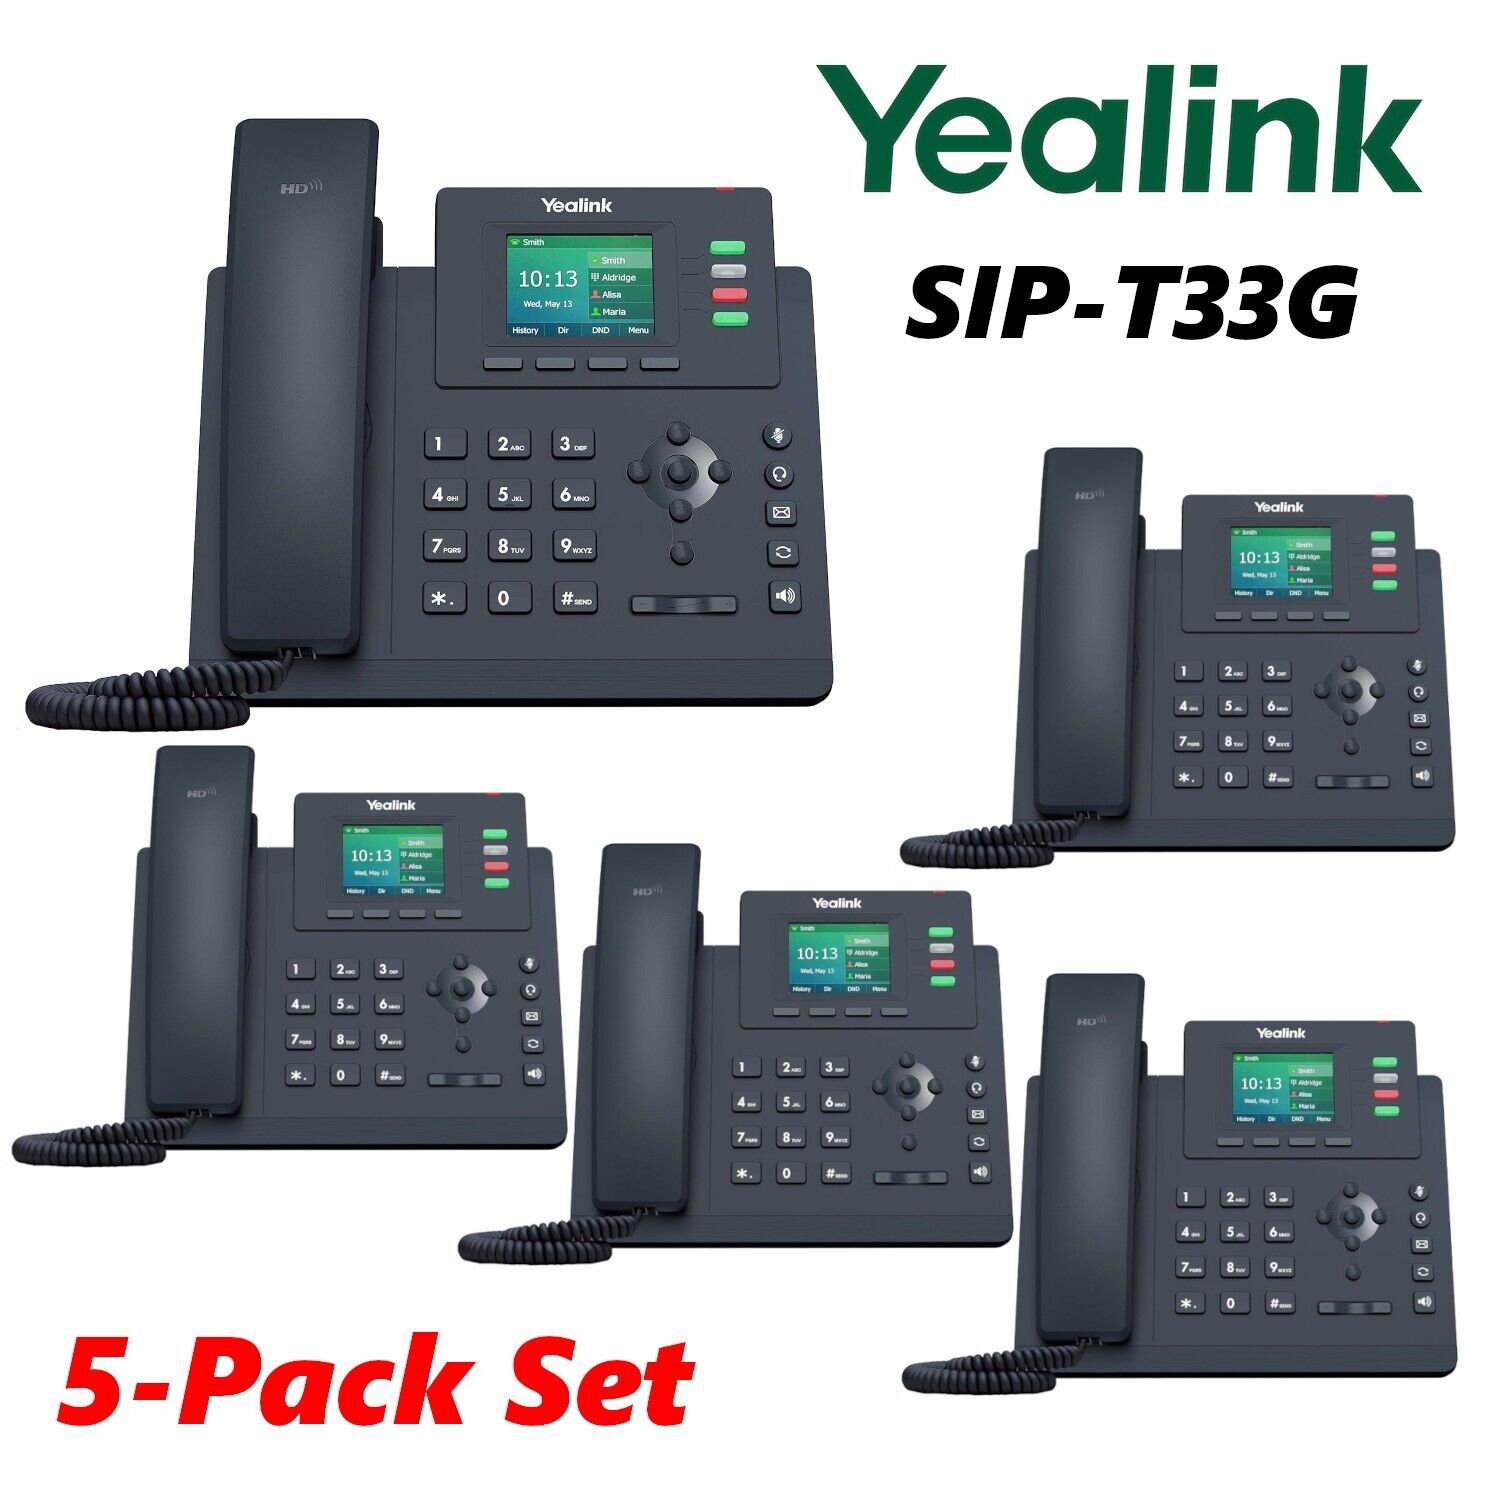 5 Yealink SIP-T33G Gigabit PoE Color LCD 4-Line Office Phone Entry Level T33G